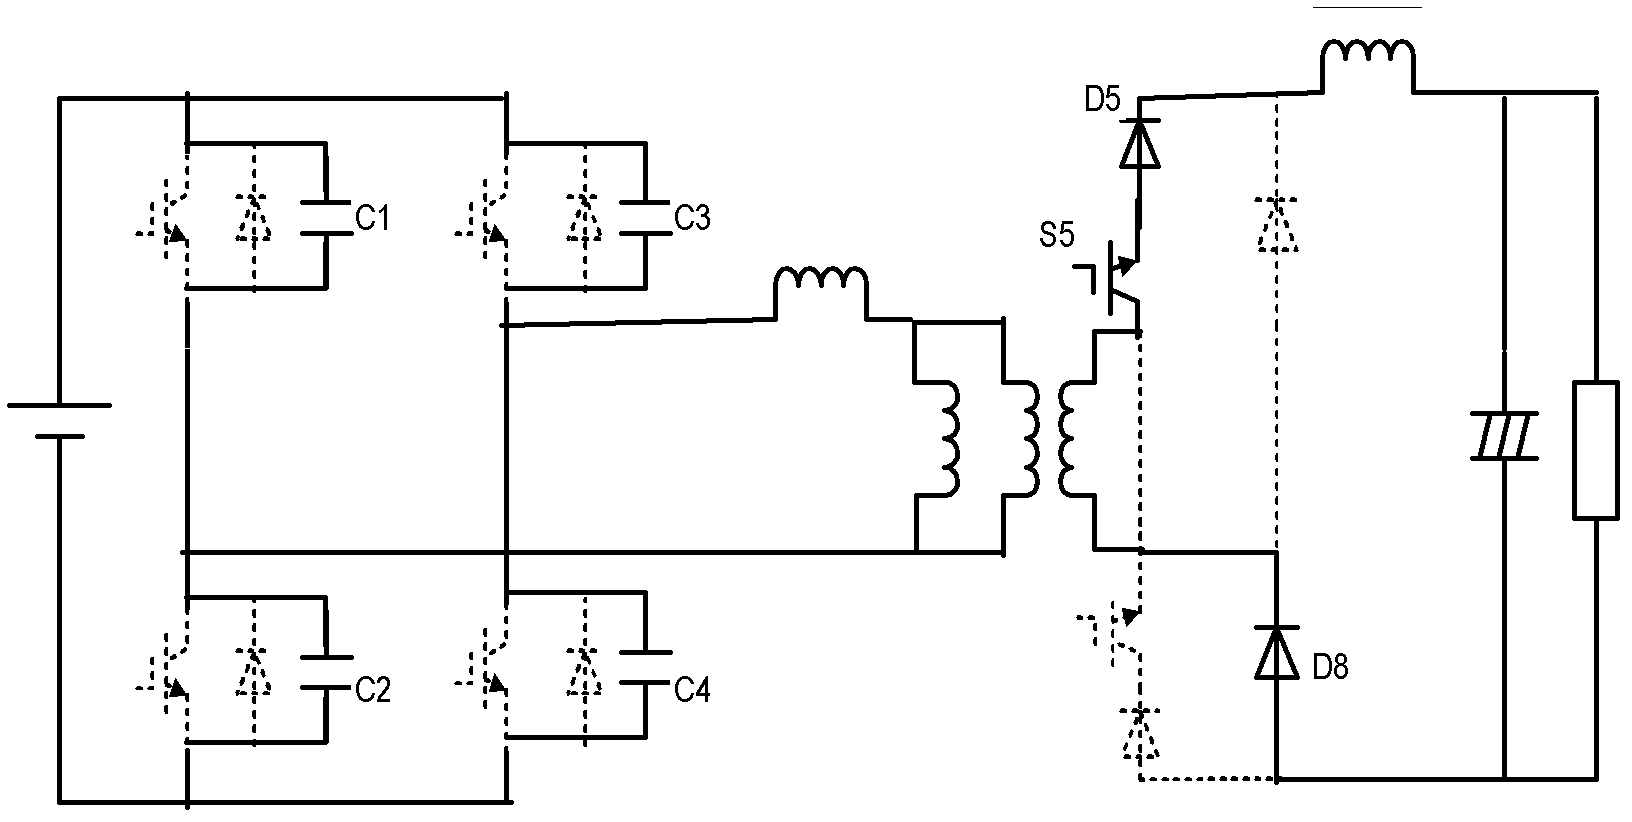 A Secondary-side Phase Shift Controlled Full-Bridge Converter